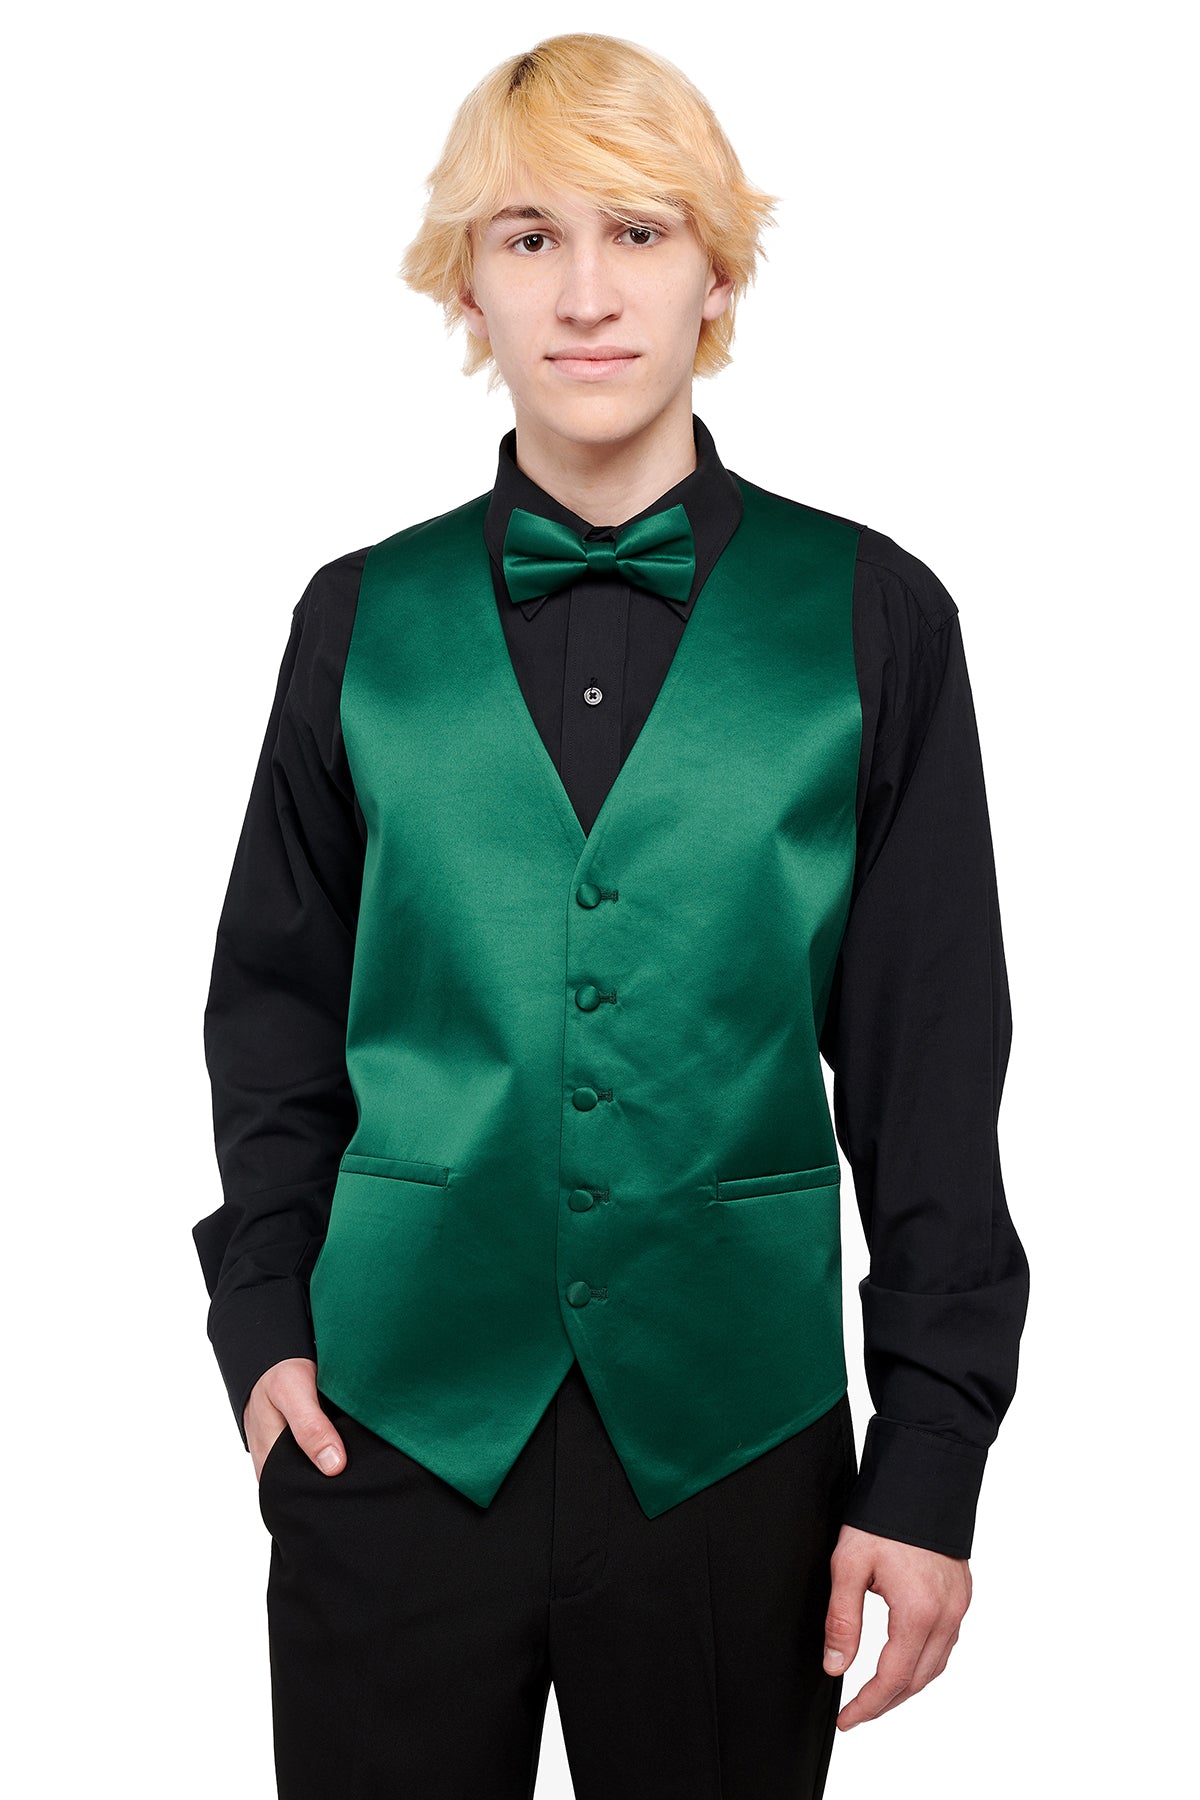 BLAKE (Style #6709) - Deluxe Vest Package with Black Shirt